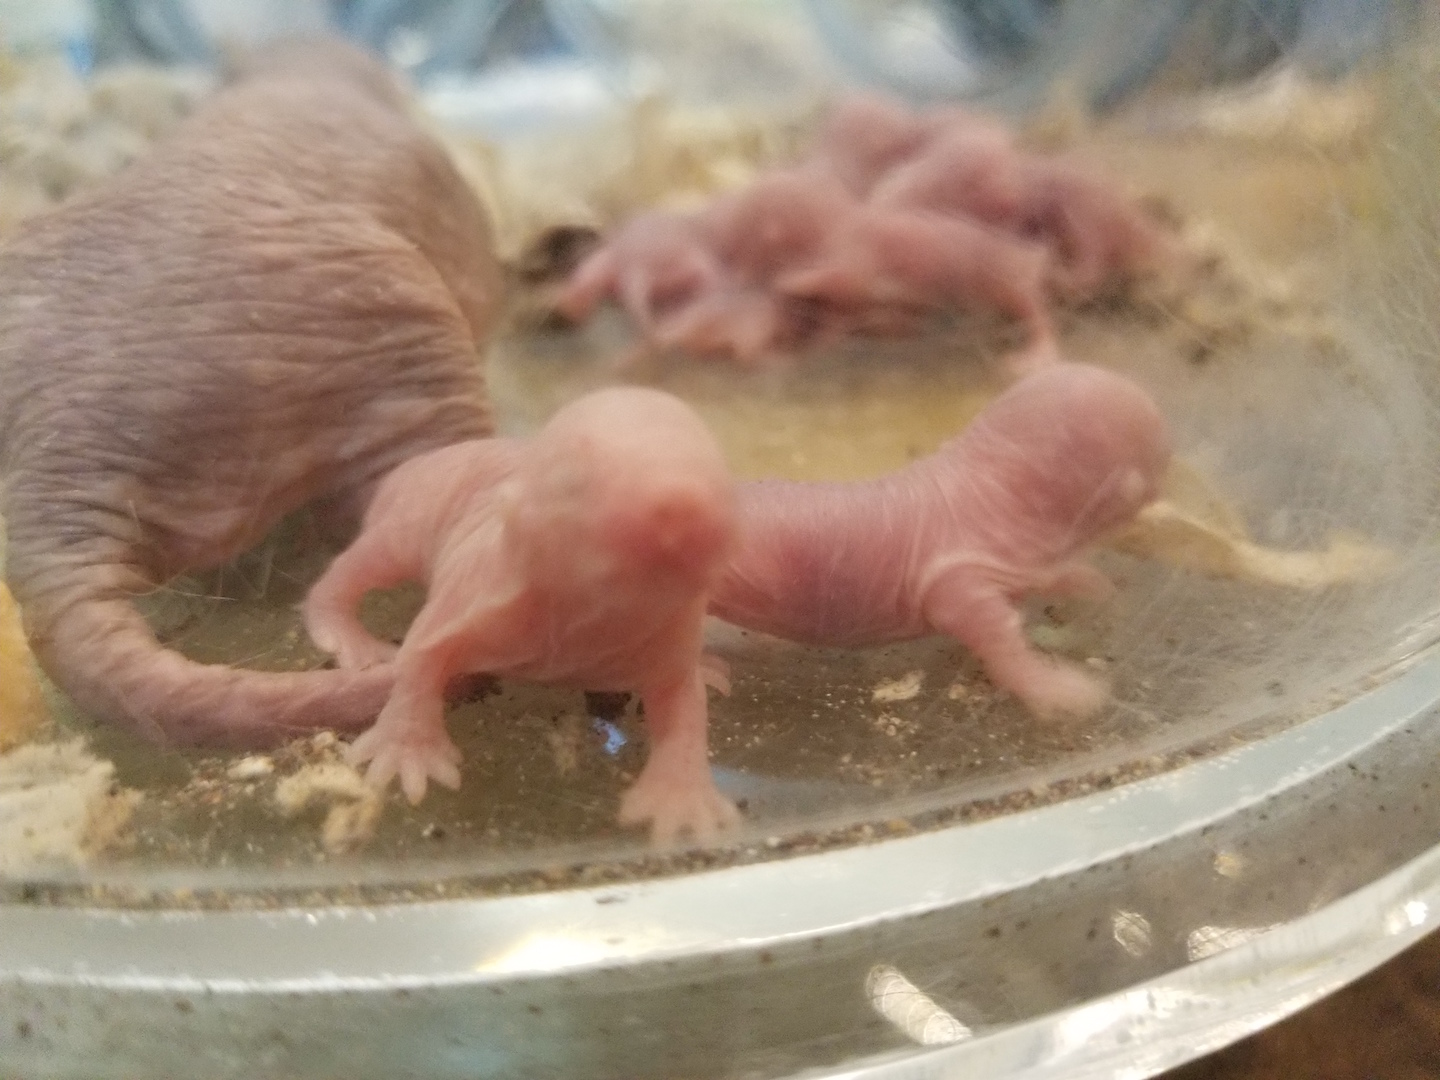 Liberty Science Center :: Our naked mole rats just had babies!